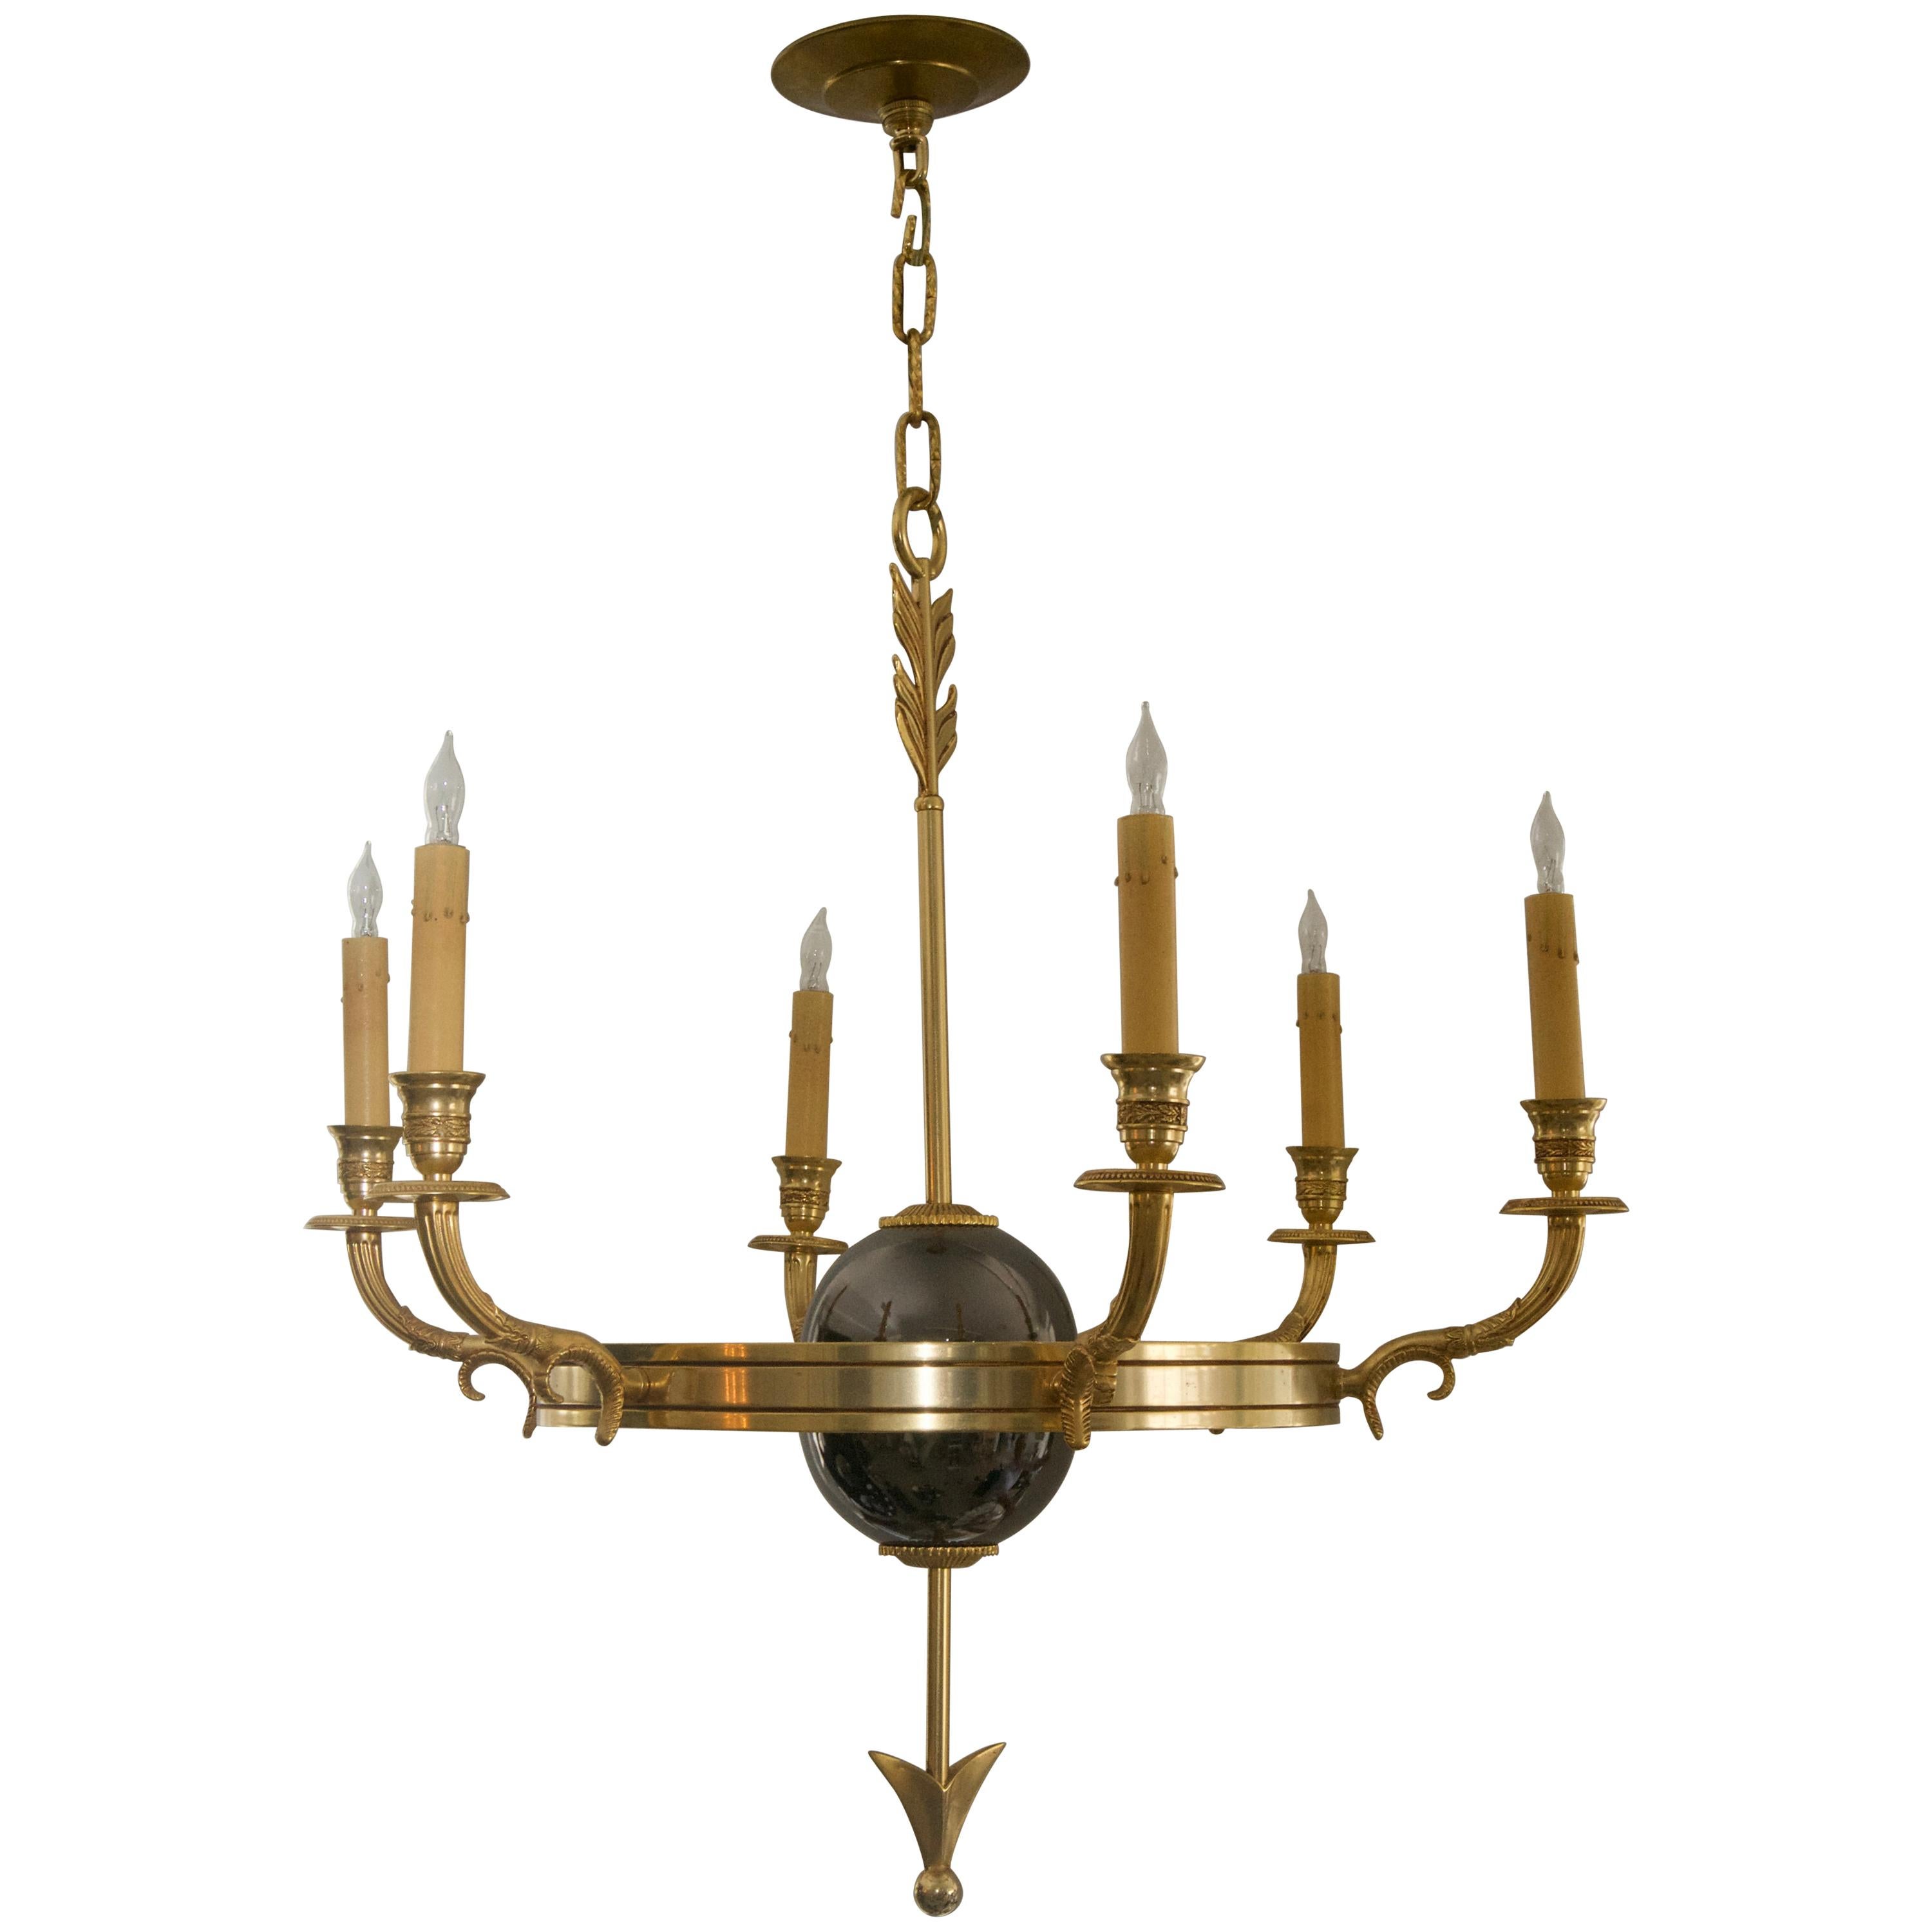  French Empire Style Chandelier